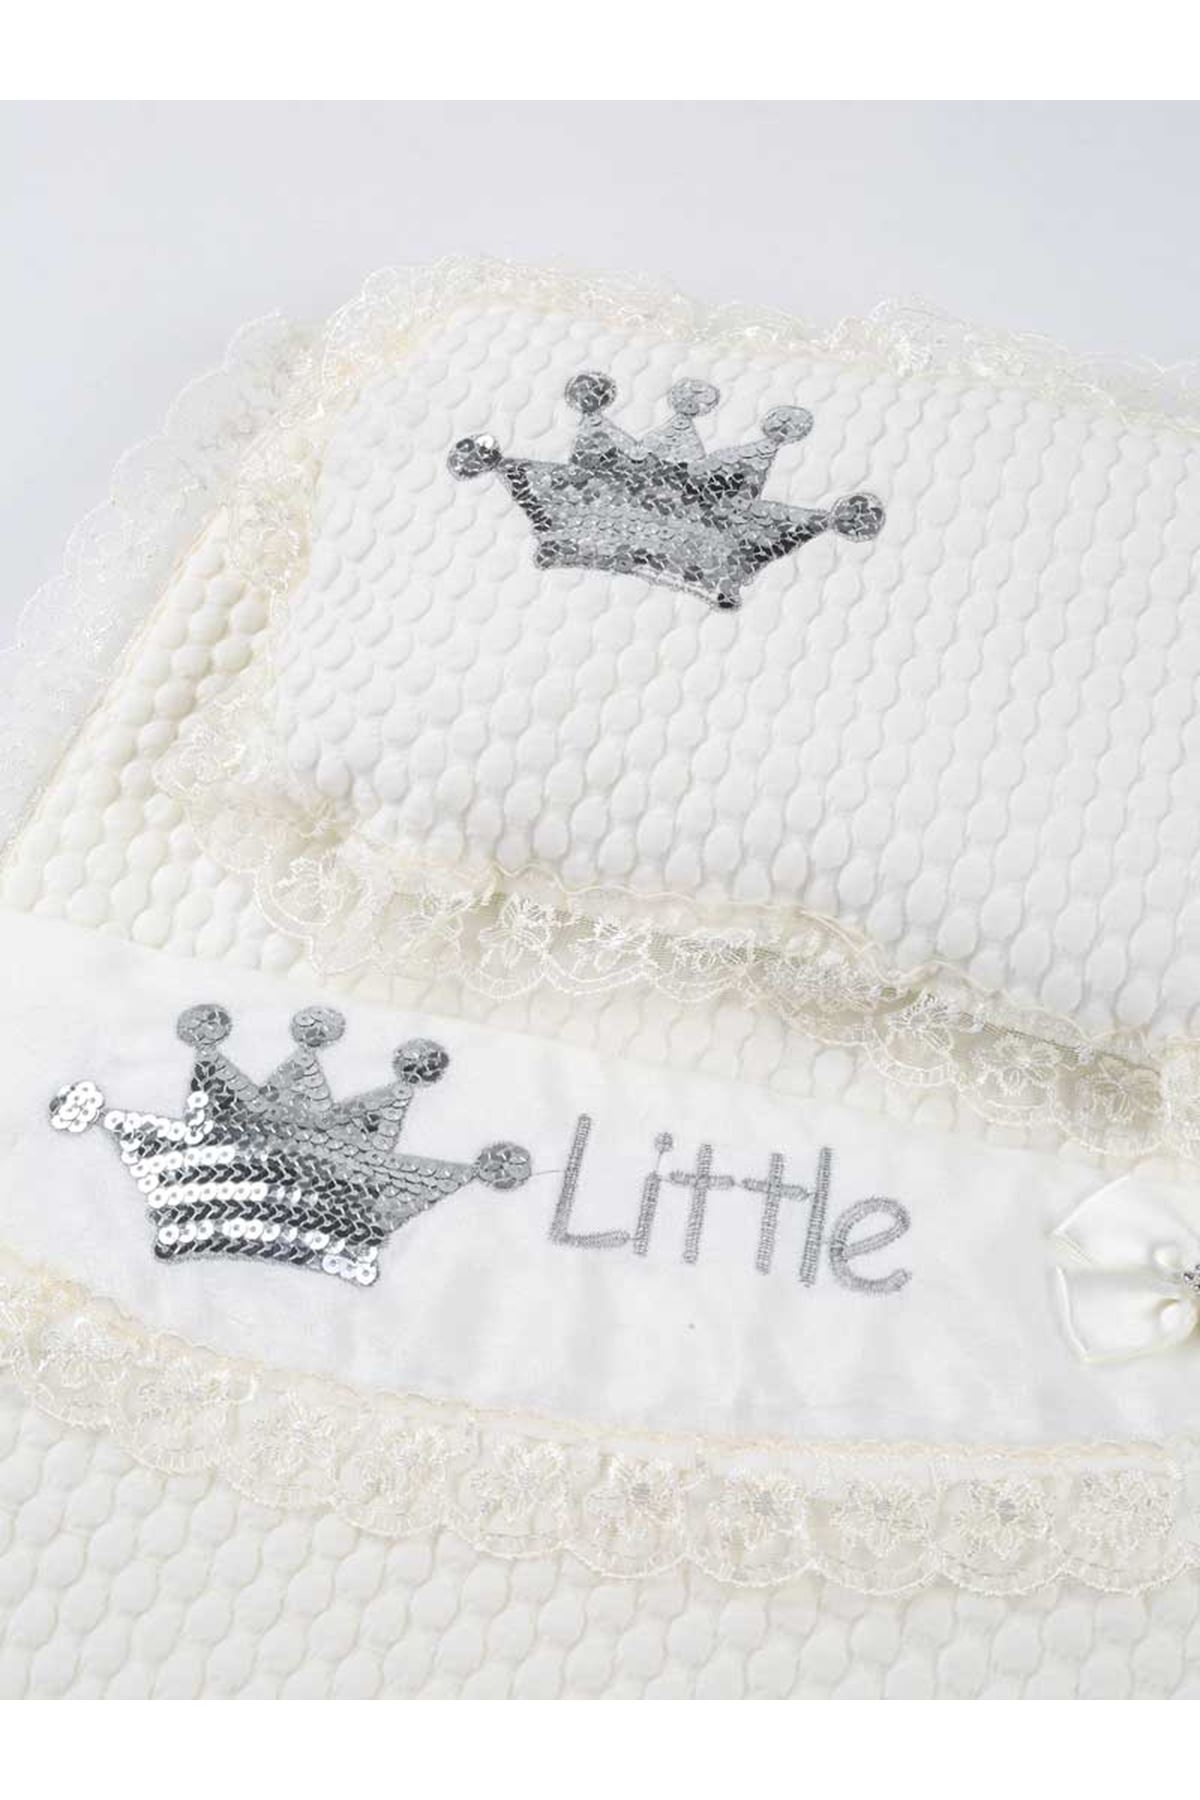 White Baby Girl Boy Swaddle King Crown The Little Prince Cotton Soft Bottom Opening Babies Newborn Stroller Bed Sweatproof Model